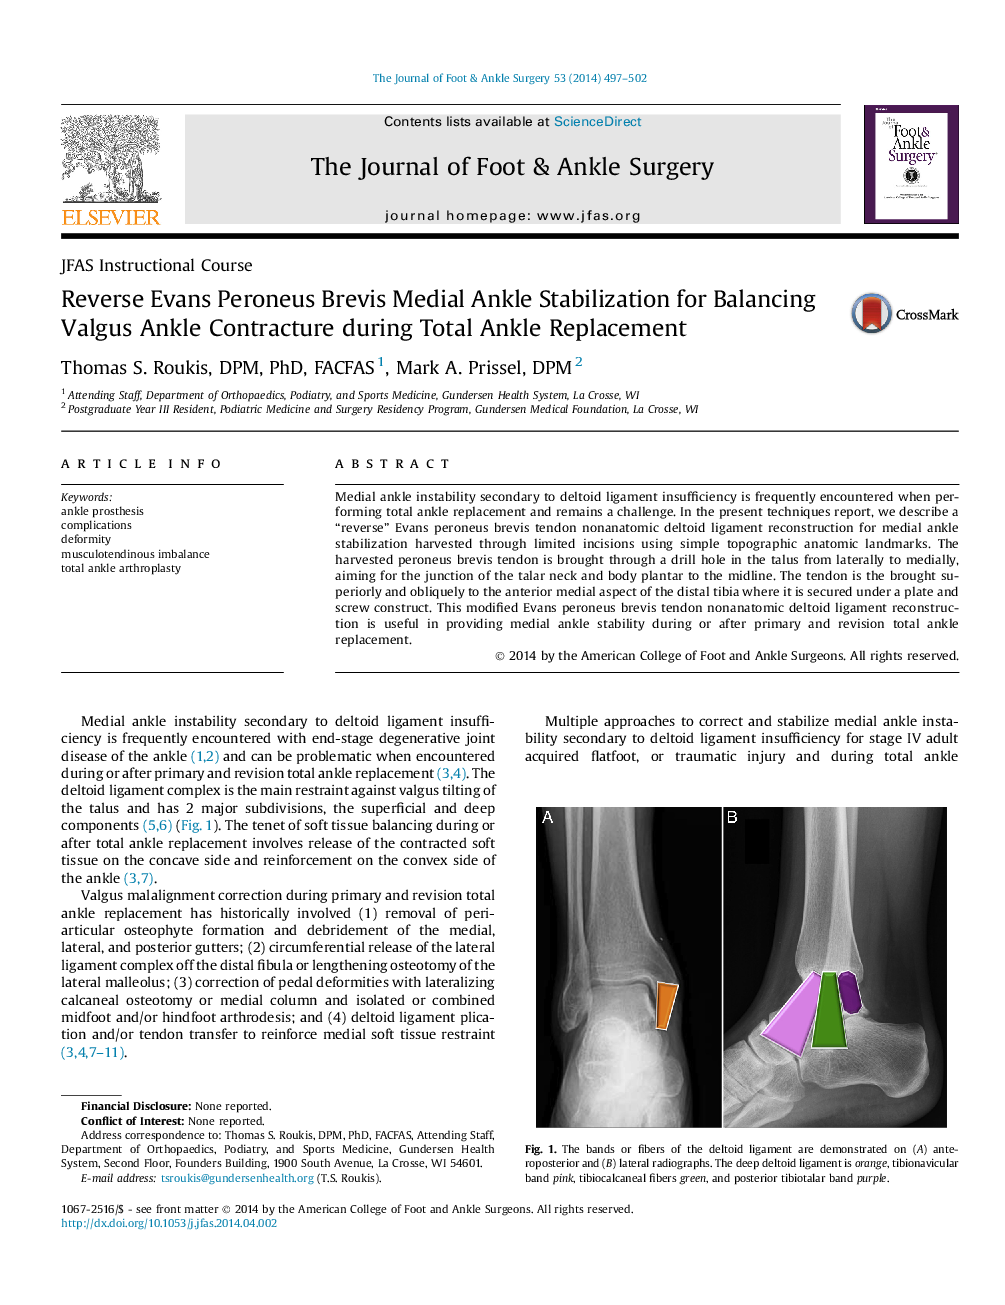 Reverse Evans Peroneus Brevis Medial Ankle Stabilization for Balancing Valgus Ankle Contracture during Total Ankle Replacement